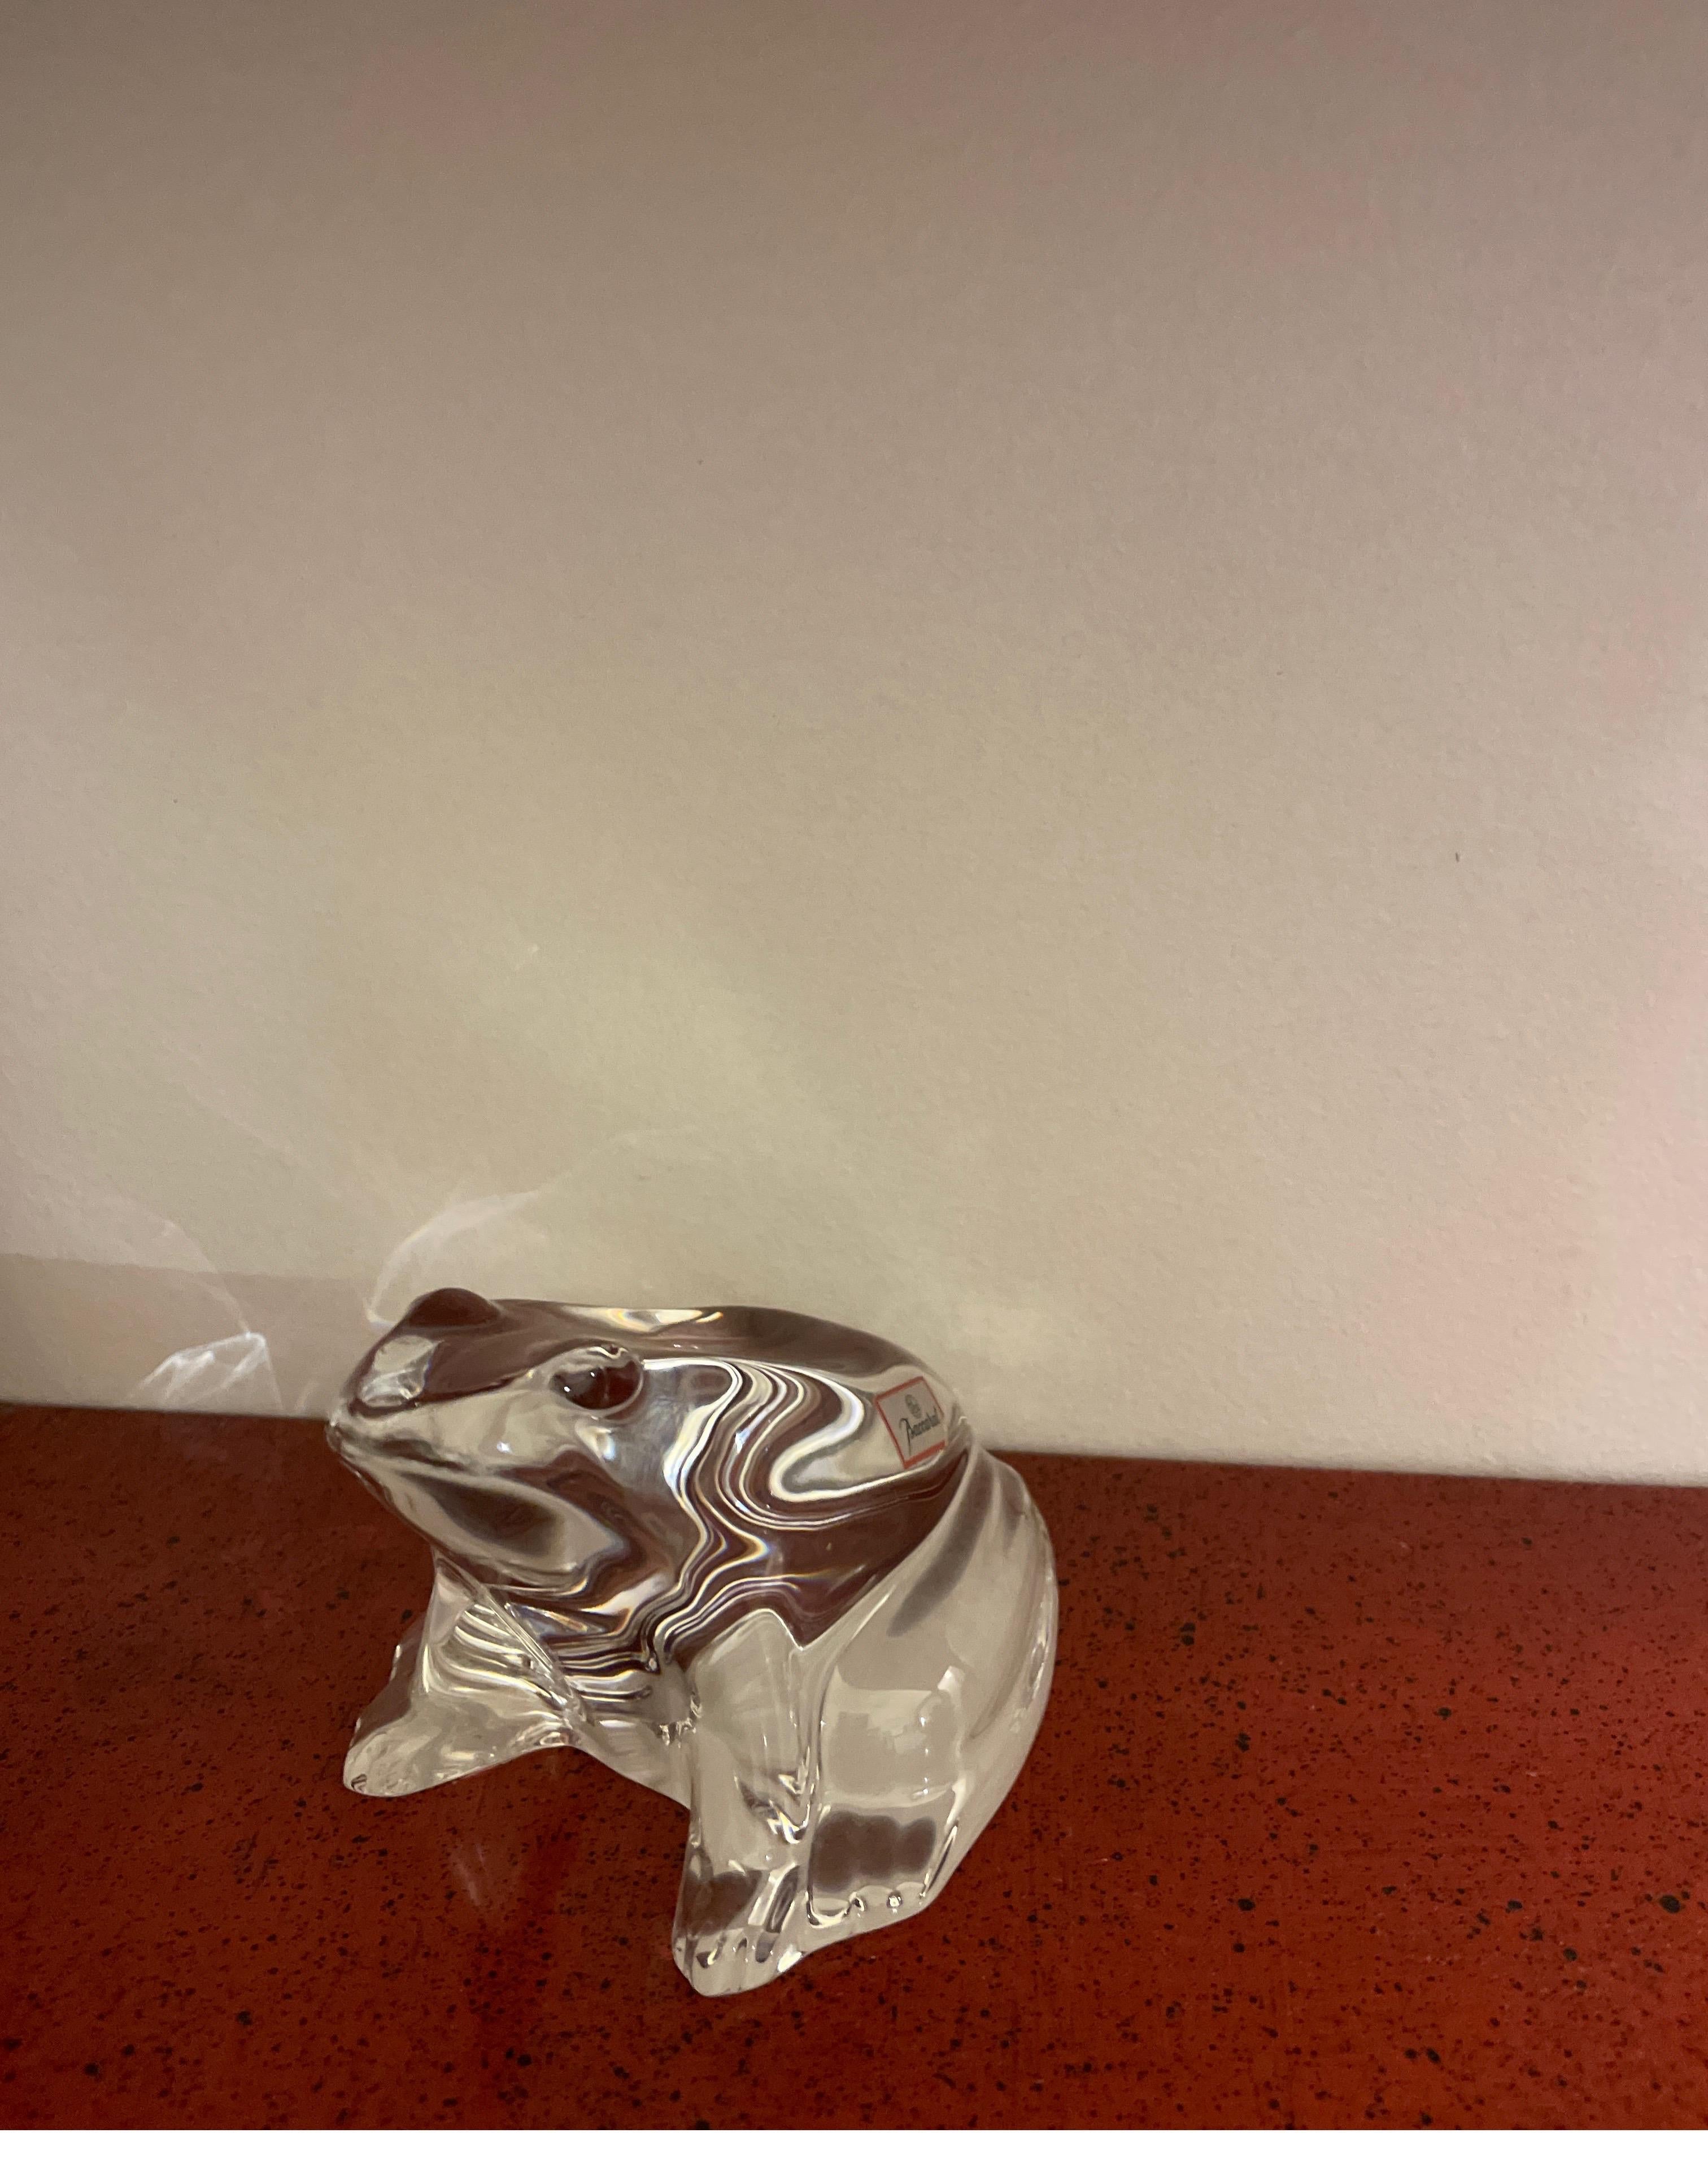 Very sweet crystal frog figurine by Baccarat of France.